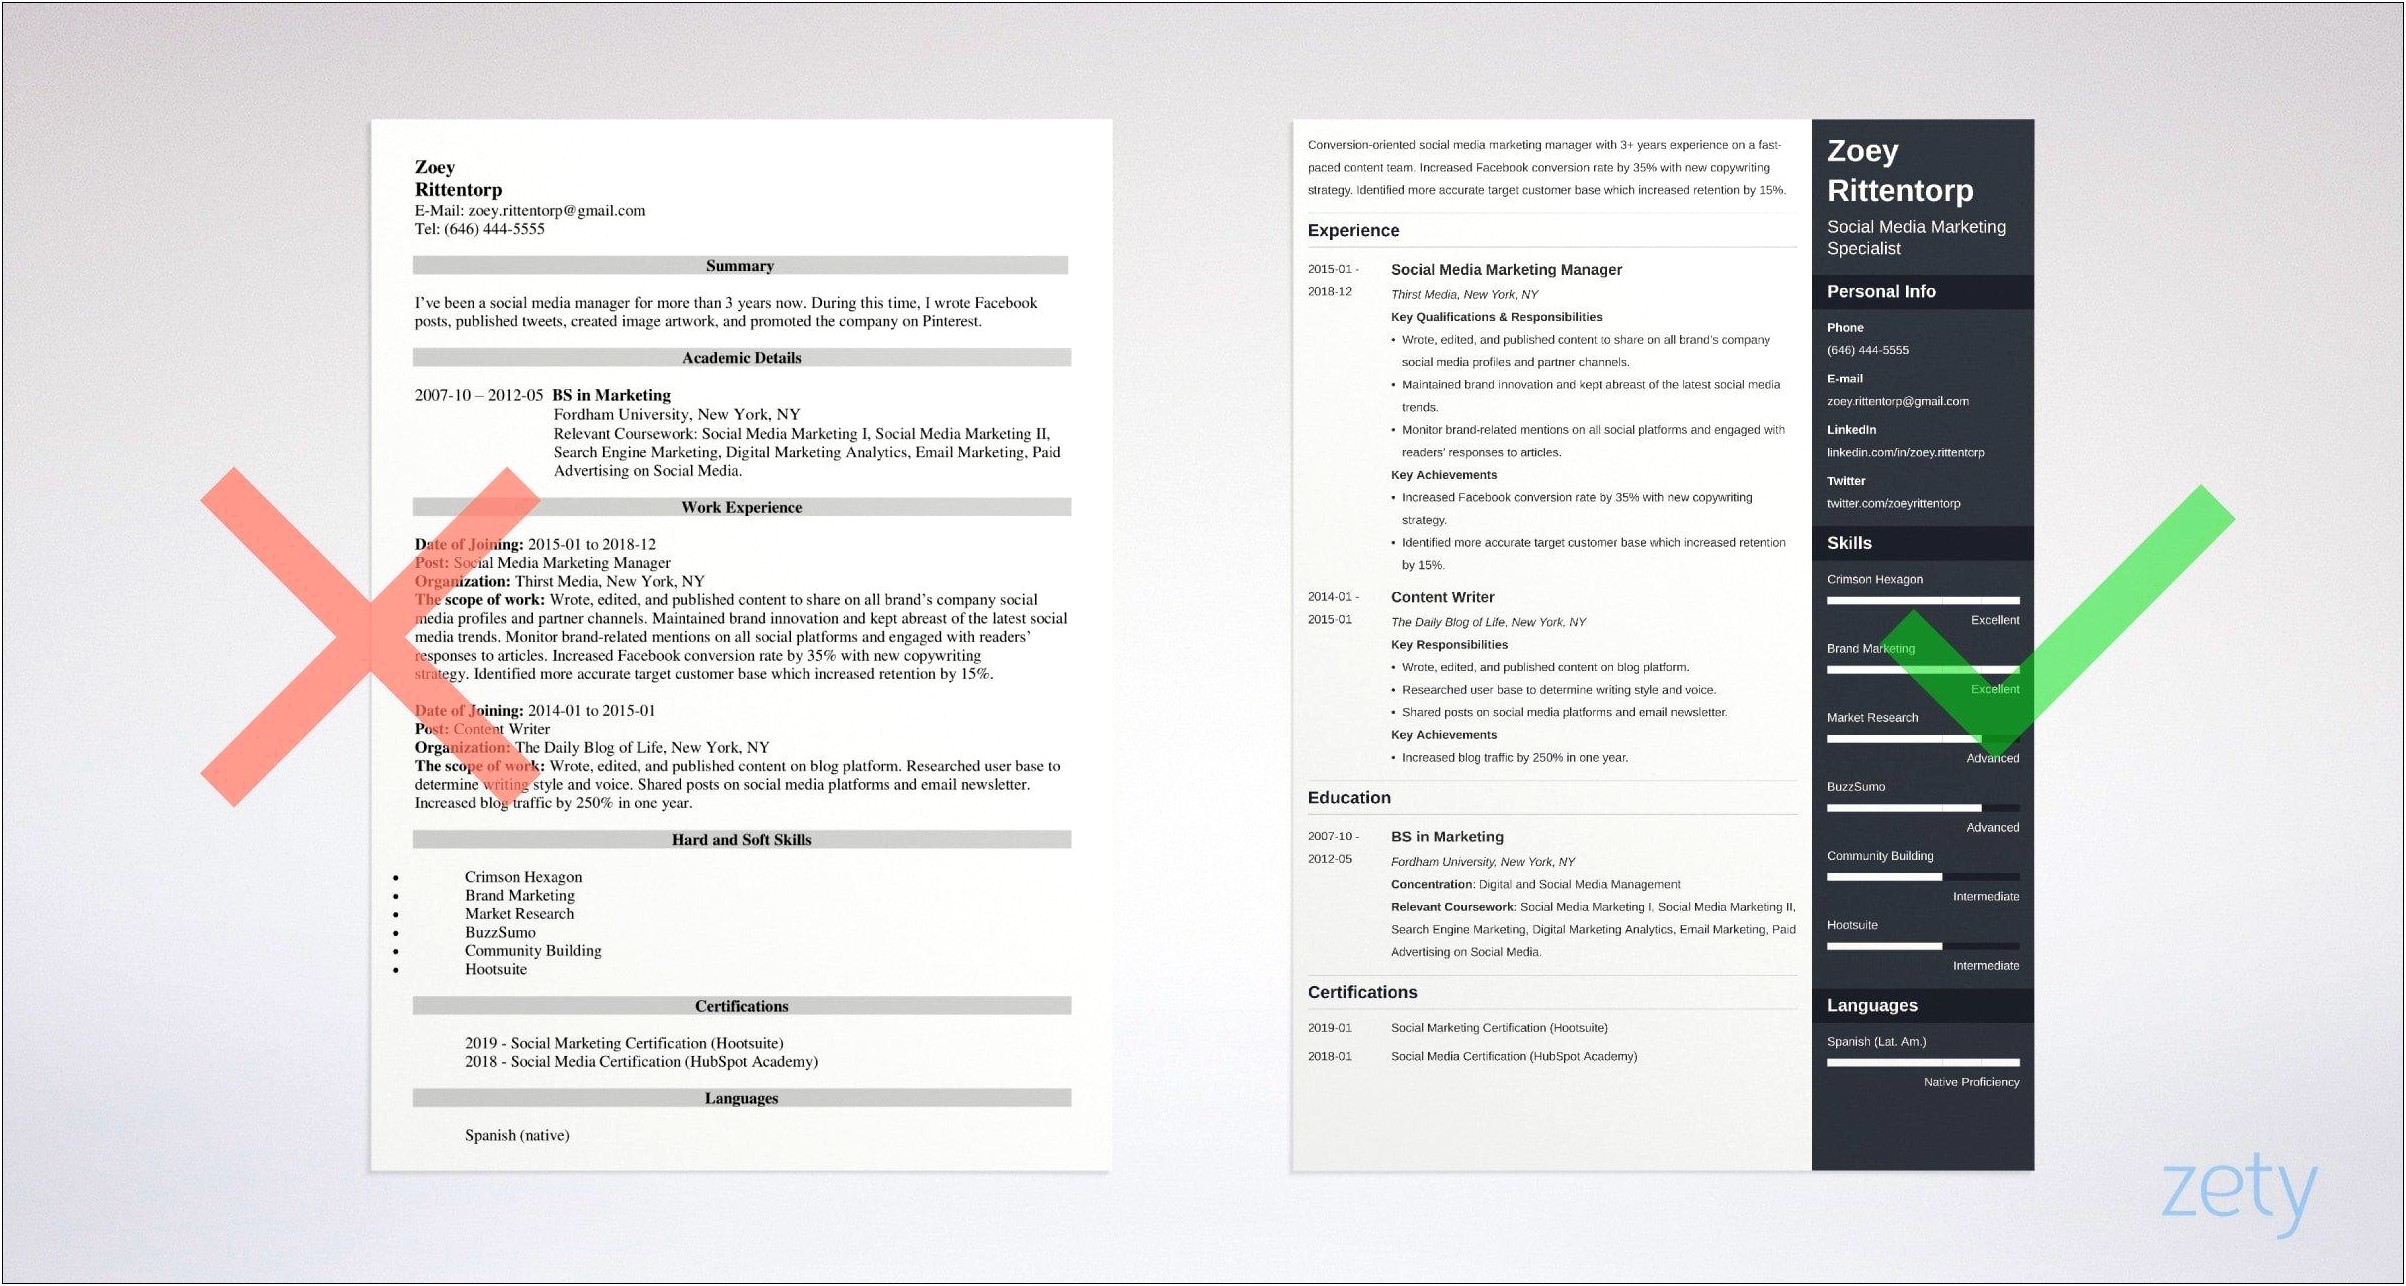 Examples For Resumes To Work Social Media